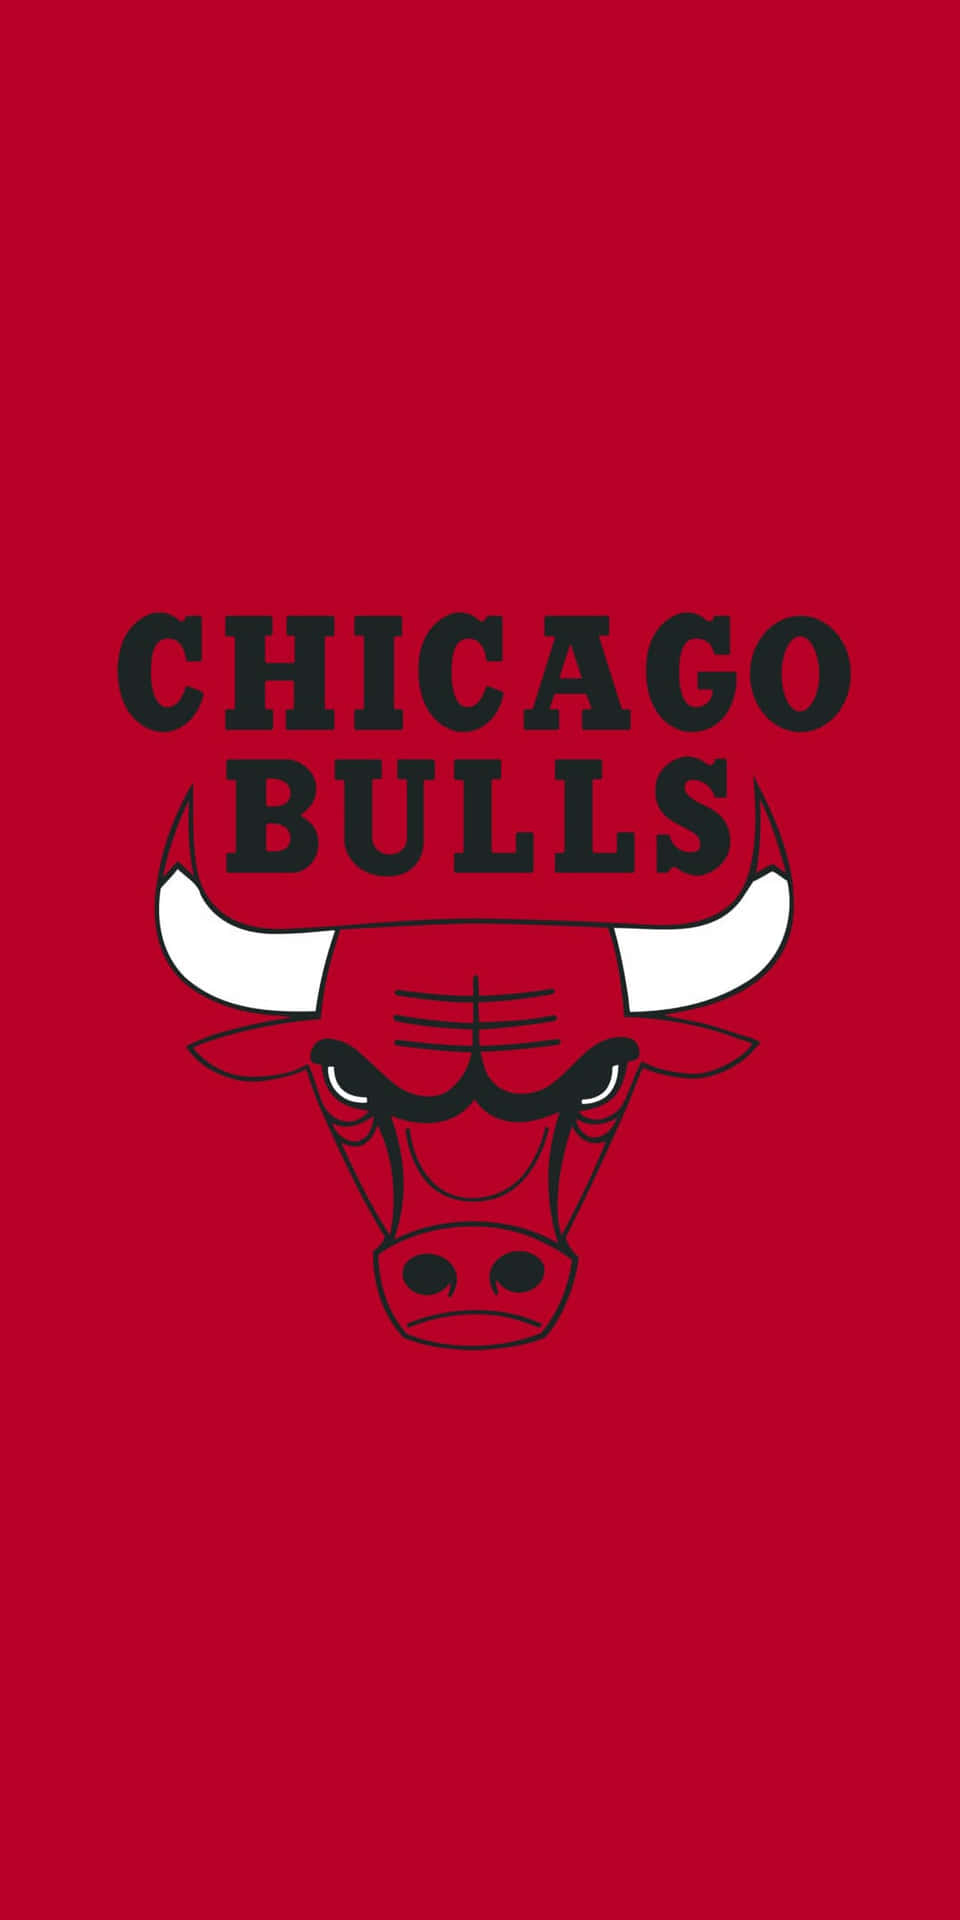 Show off your Bulls fandom with this dynamic iPhone wallpaper! Wallpaper